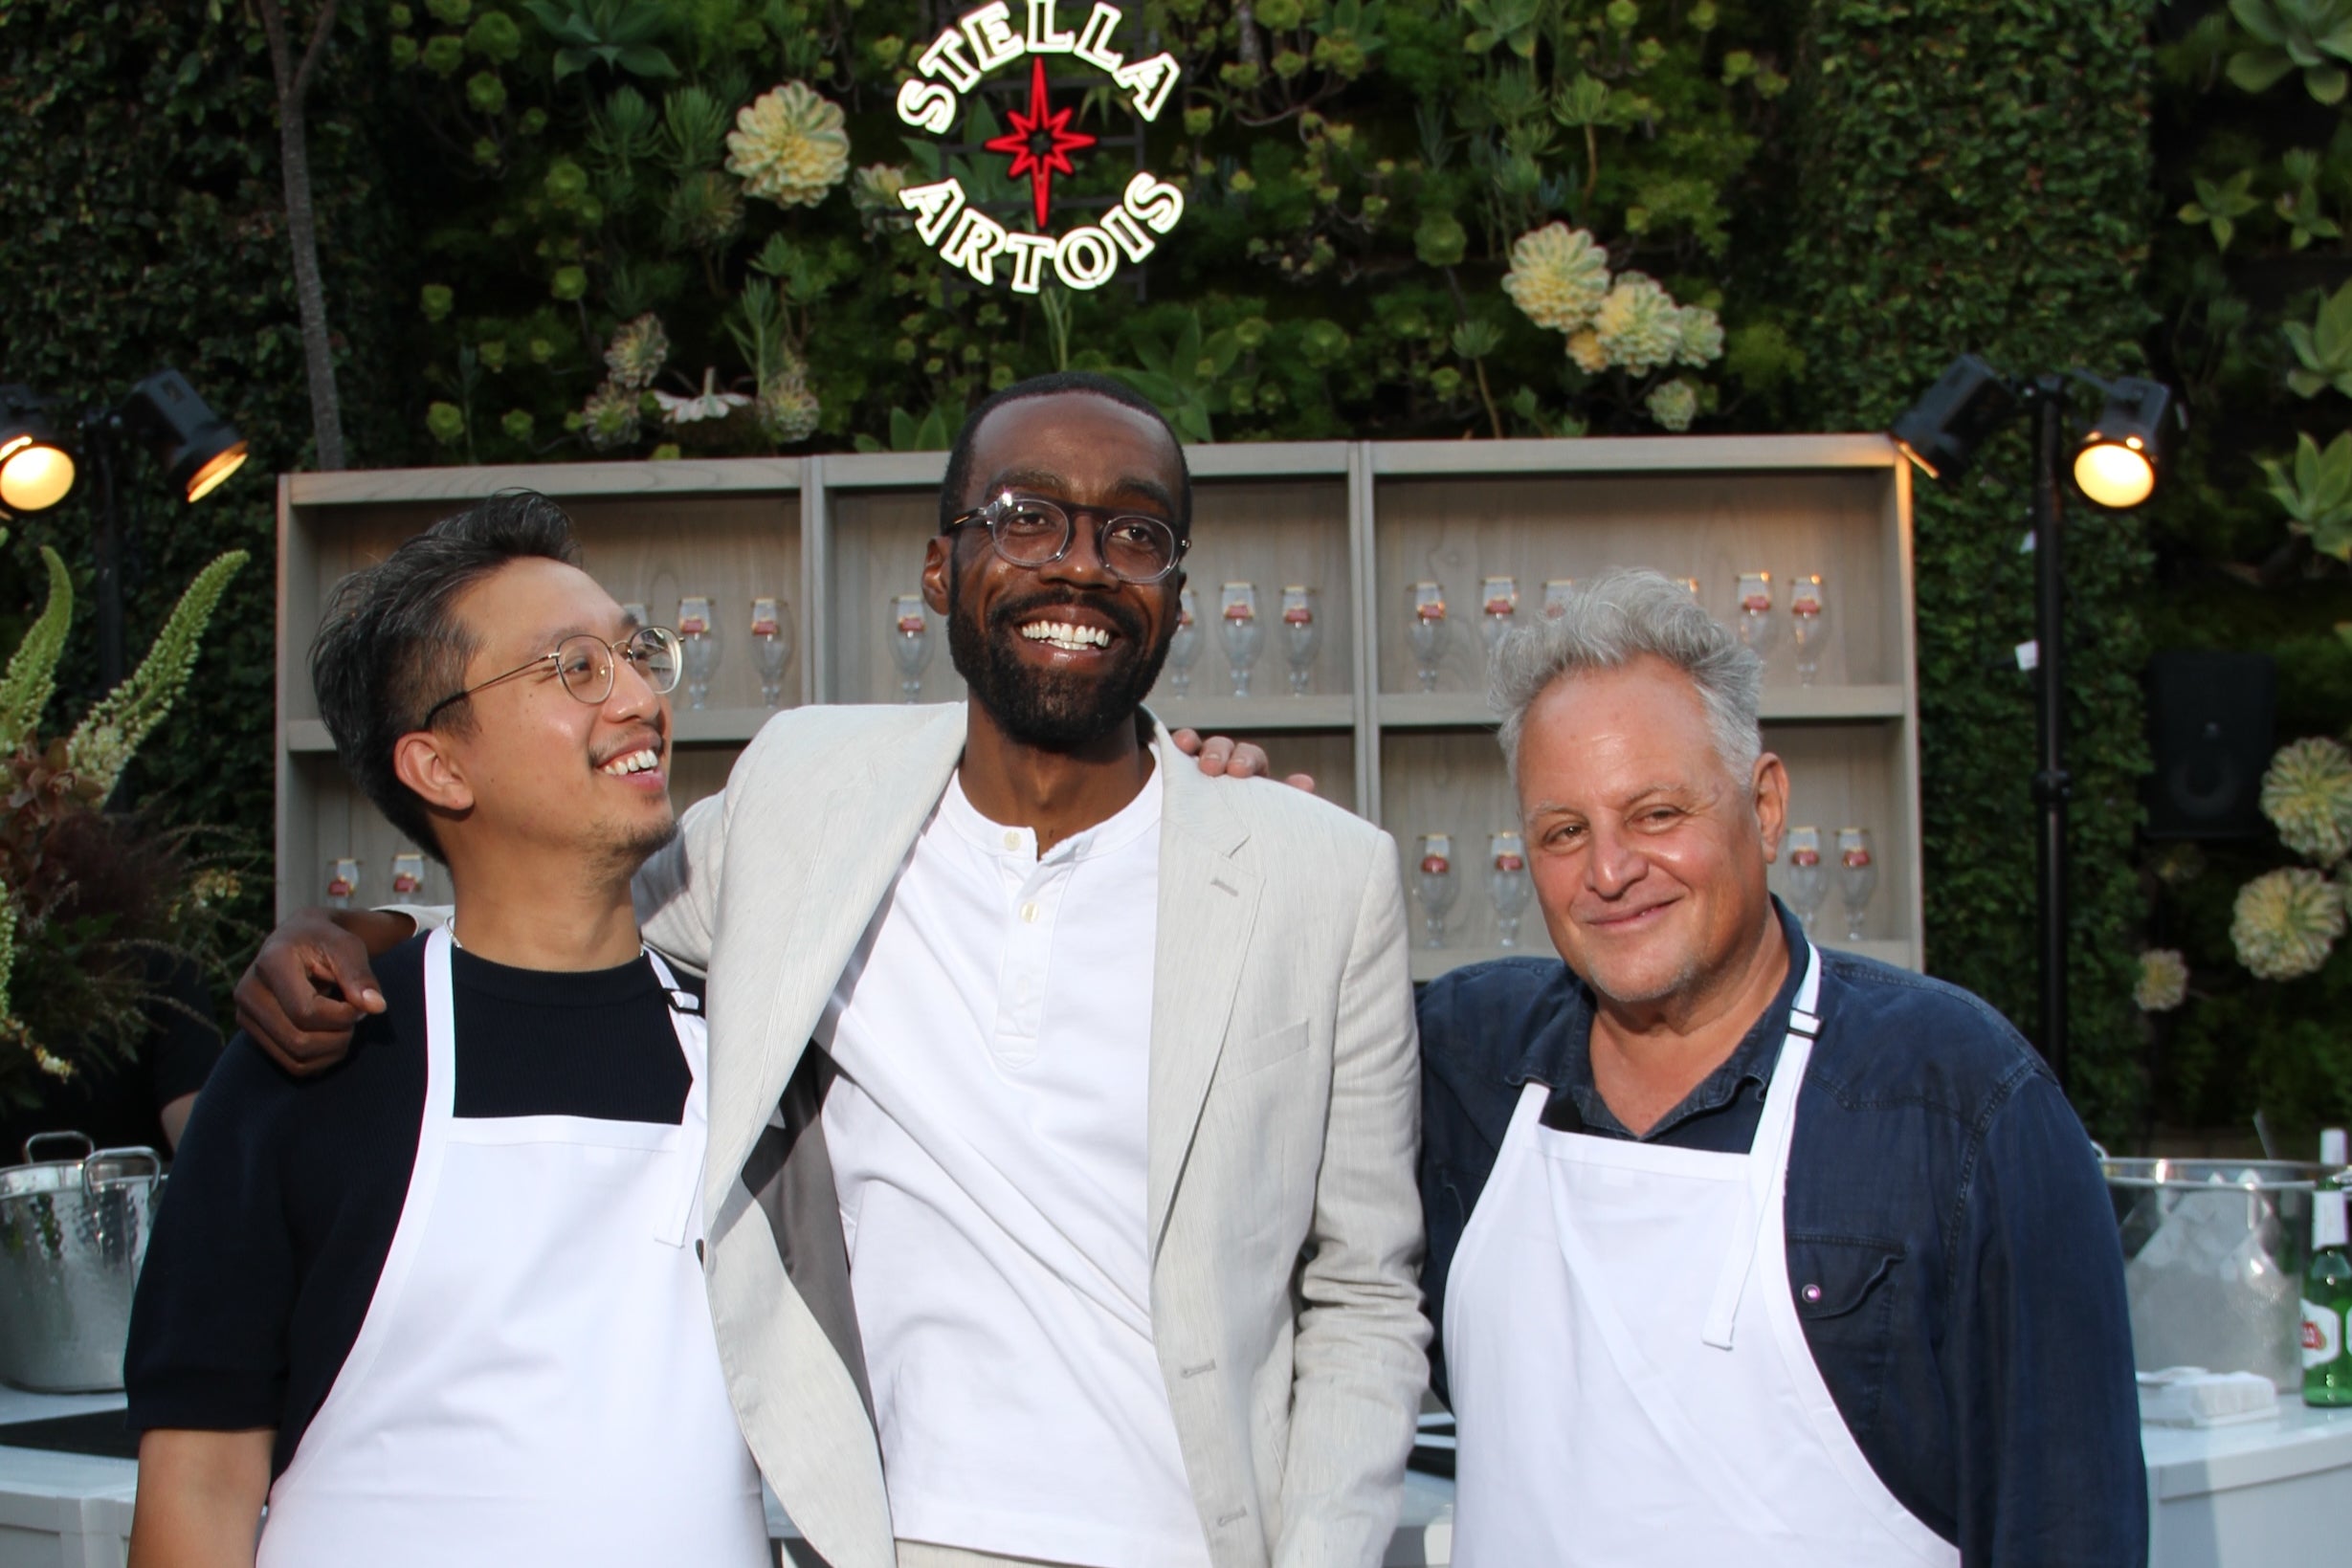 Hendrix (centre) with chefs Justin Pichetrungsi of Anajak Thai and Chris Bianco of Pizzeria Bianco